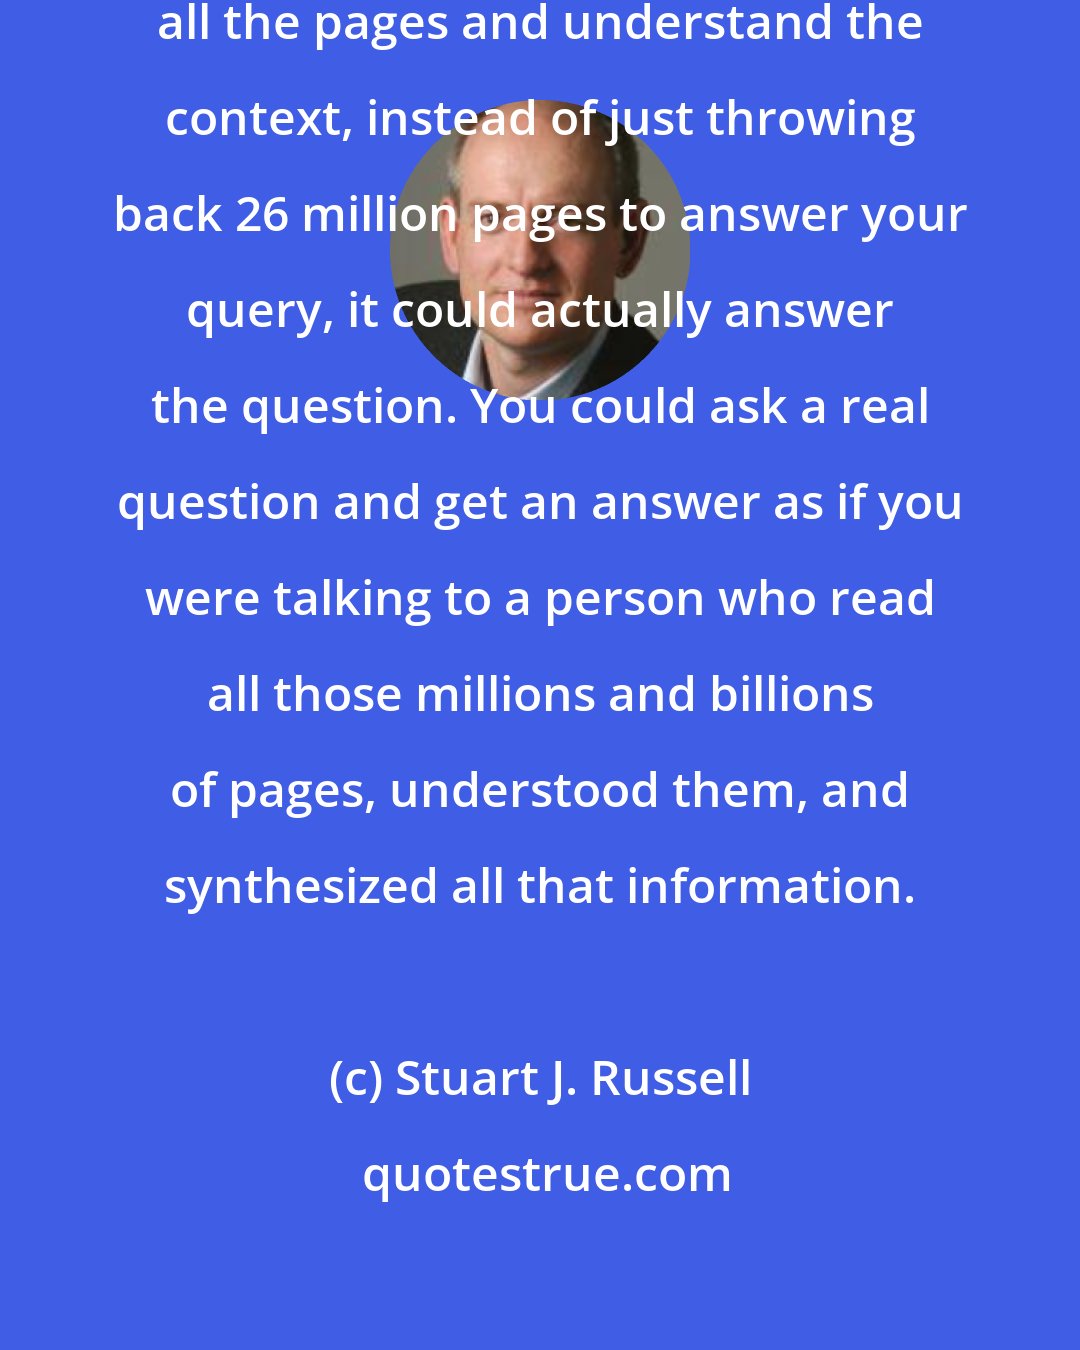 Stuart J. Russell: If you had a system that could read all the pages and understand the context, instead of just throwing back 26 million pages to answer your query, it could actually answer the question. You could ask a real question and get an answer as if you were talking to a person who read all those millions and billions of pages, understood them, and synthesized all that information.